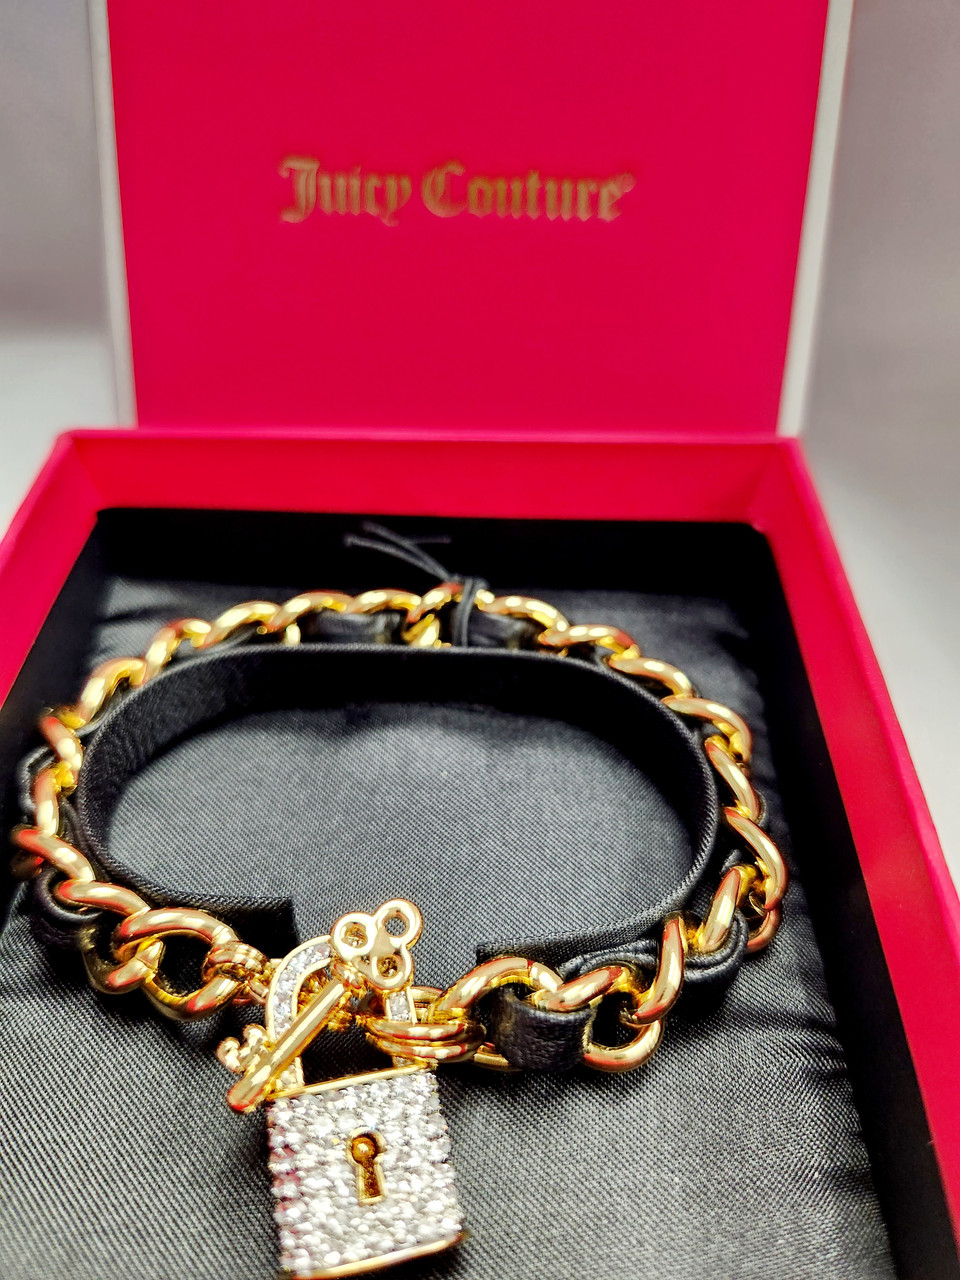 Juicy Couture, Jewelry, Vintage Juicy Couture Jewelry Box